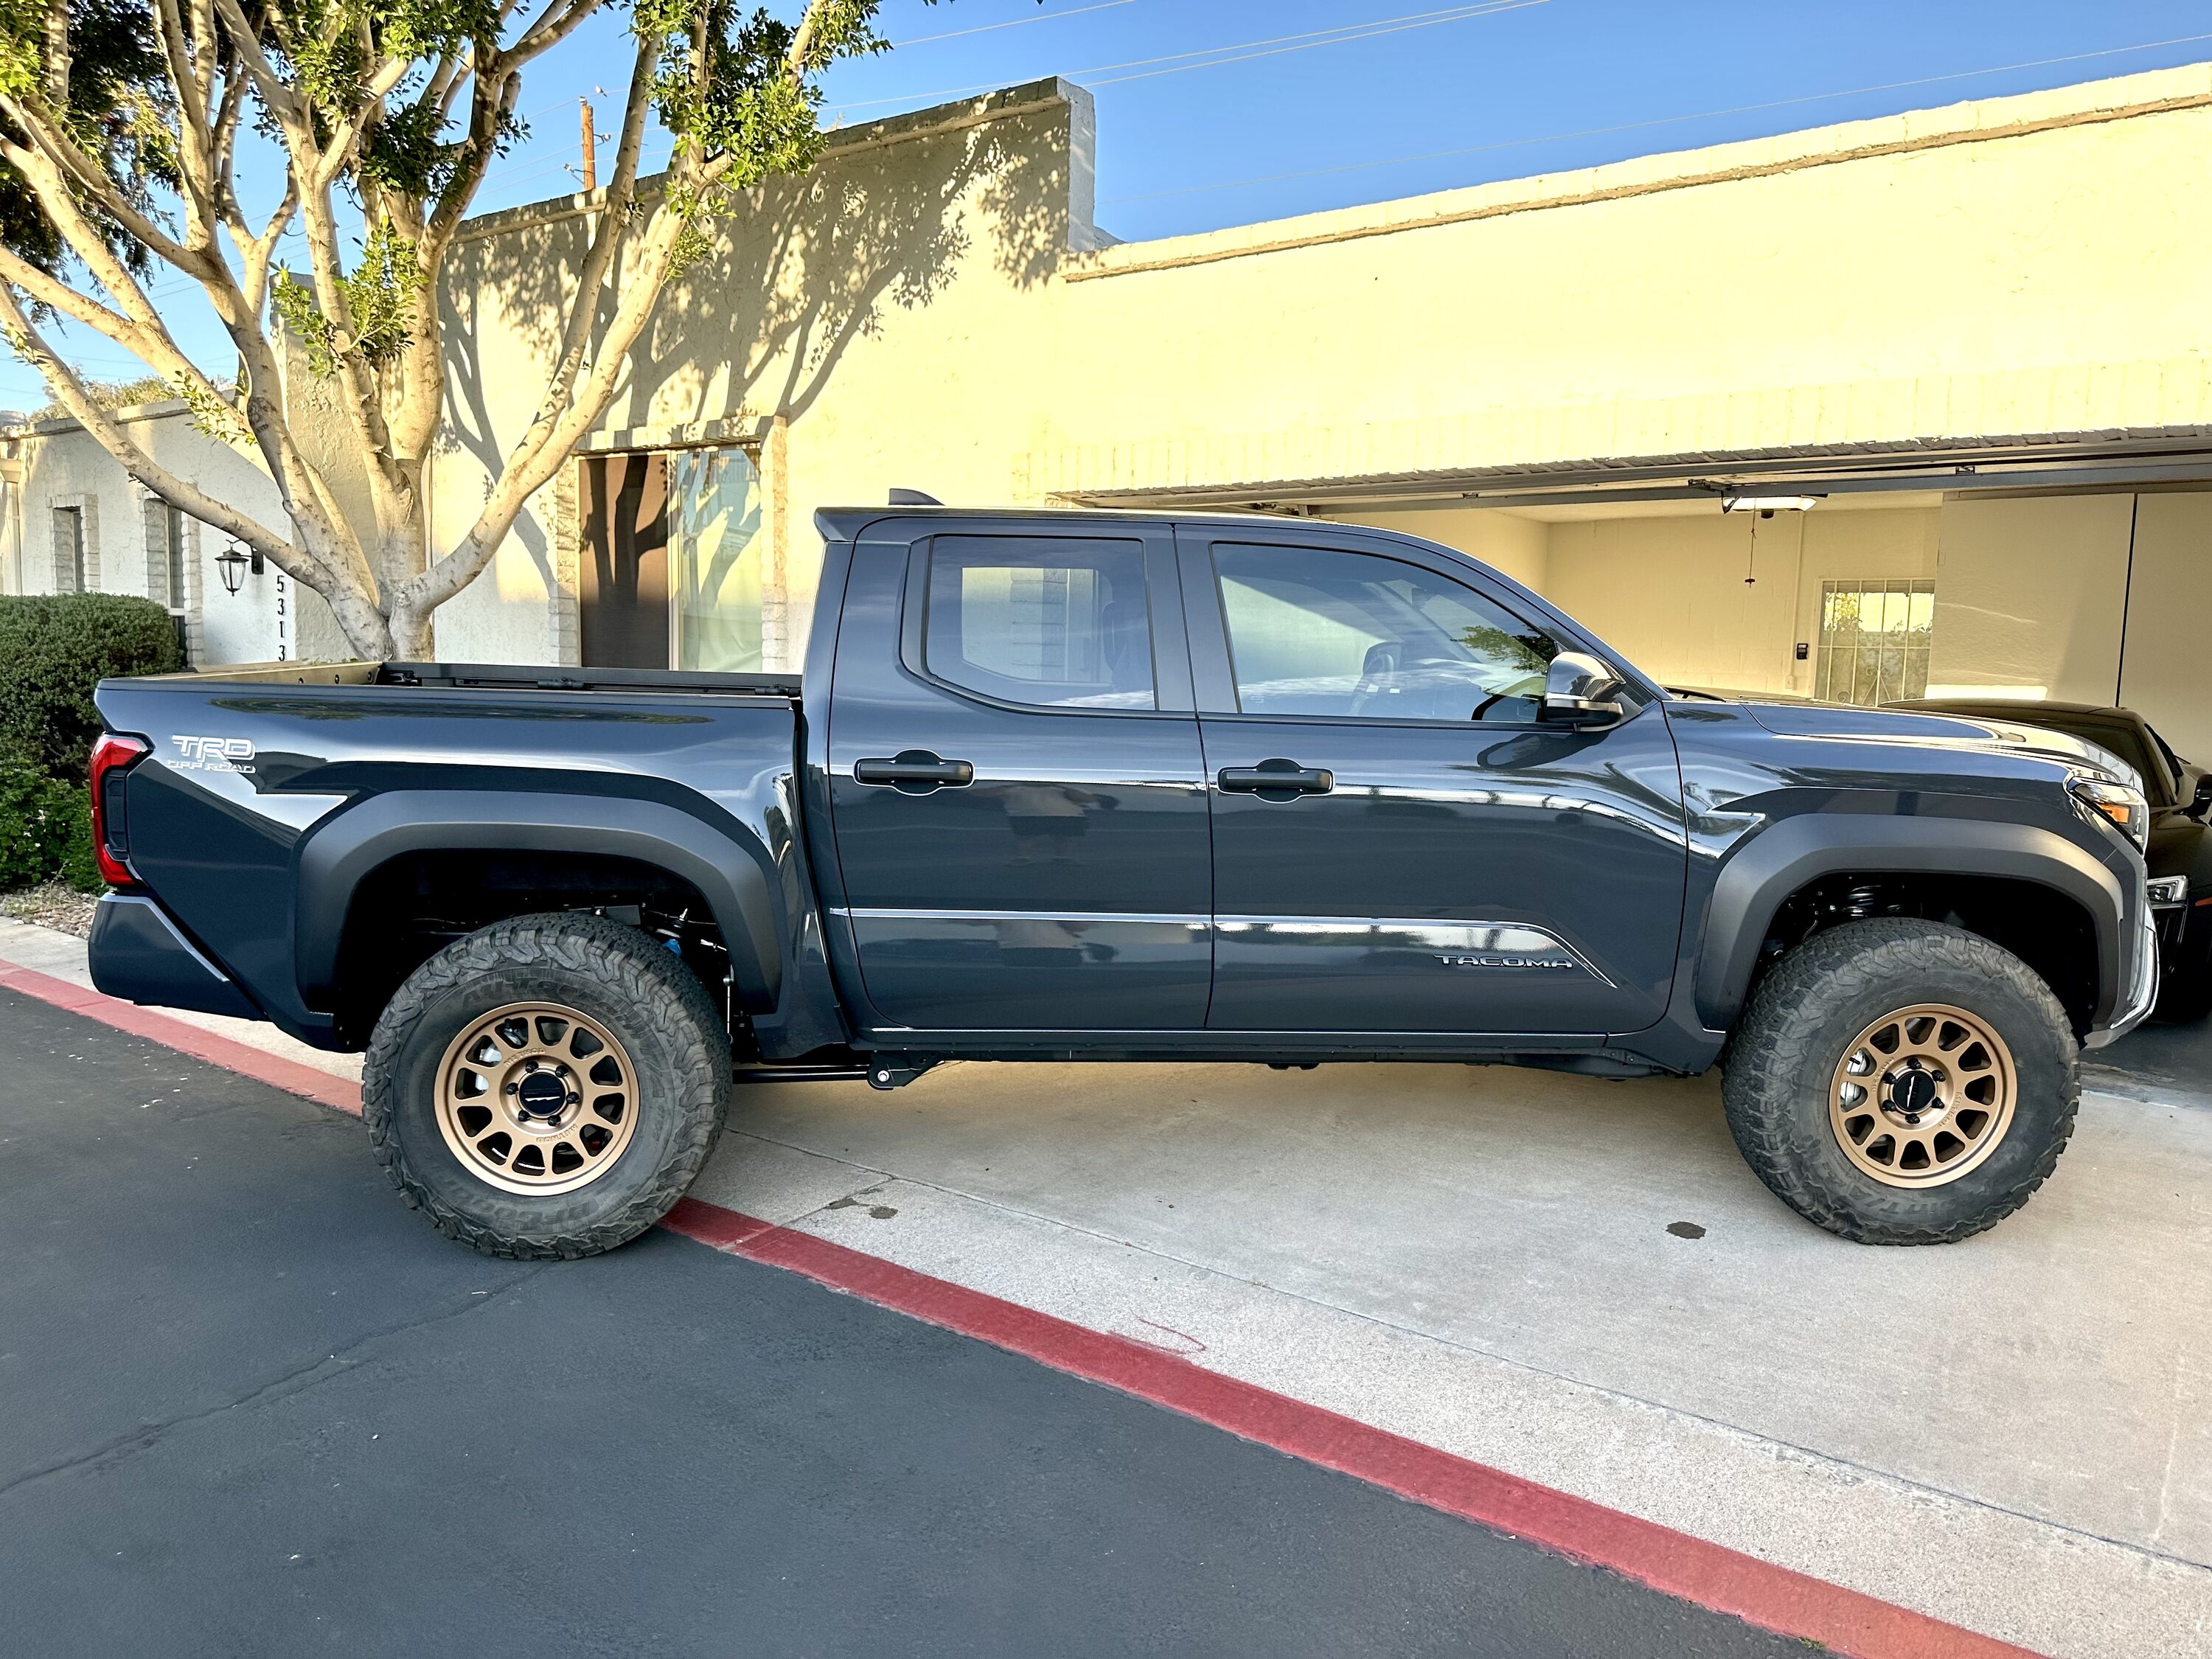 2024 Tacoma 285/70/17 tires with or without lift? IMG_2650